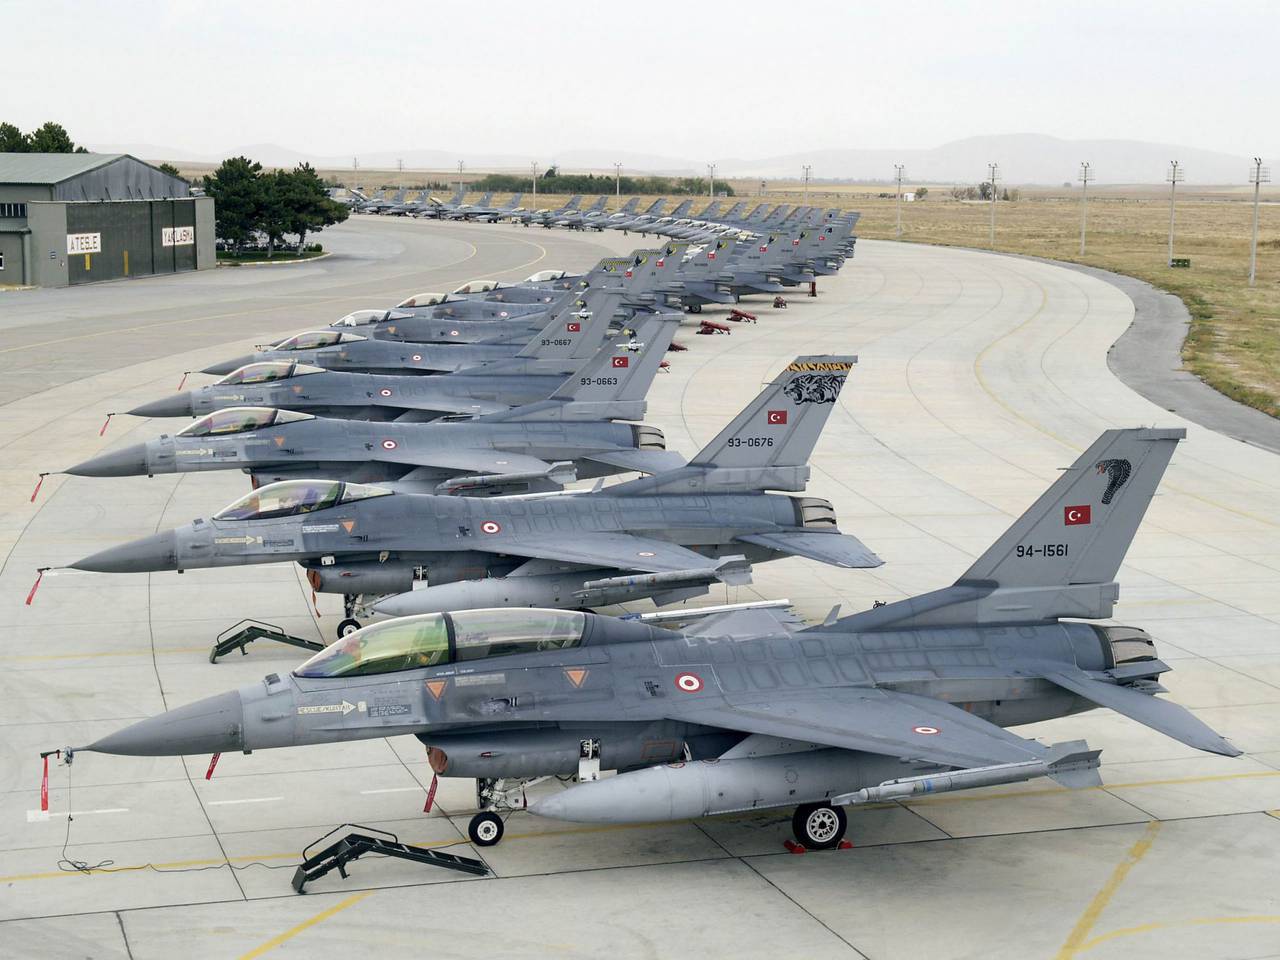 Overview of the Air Force of Turkey. Step back